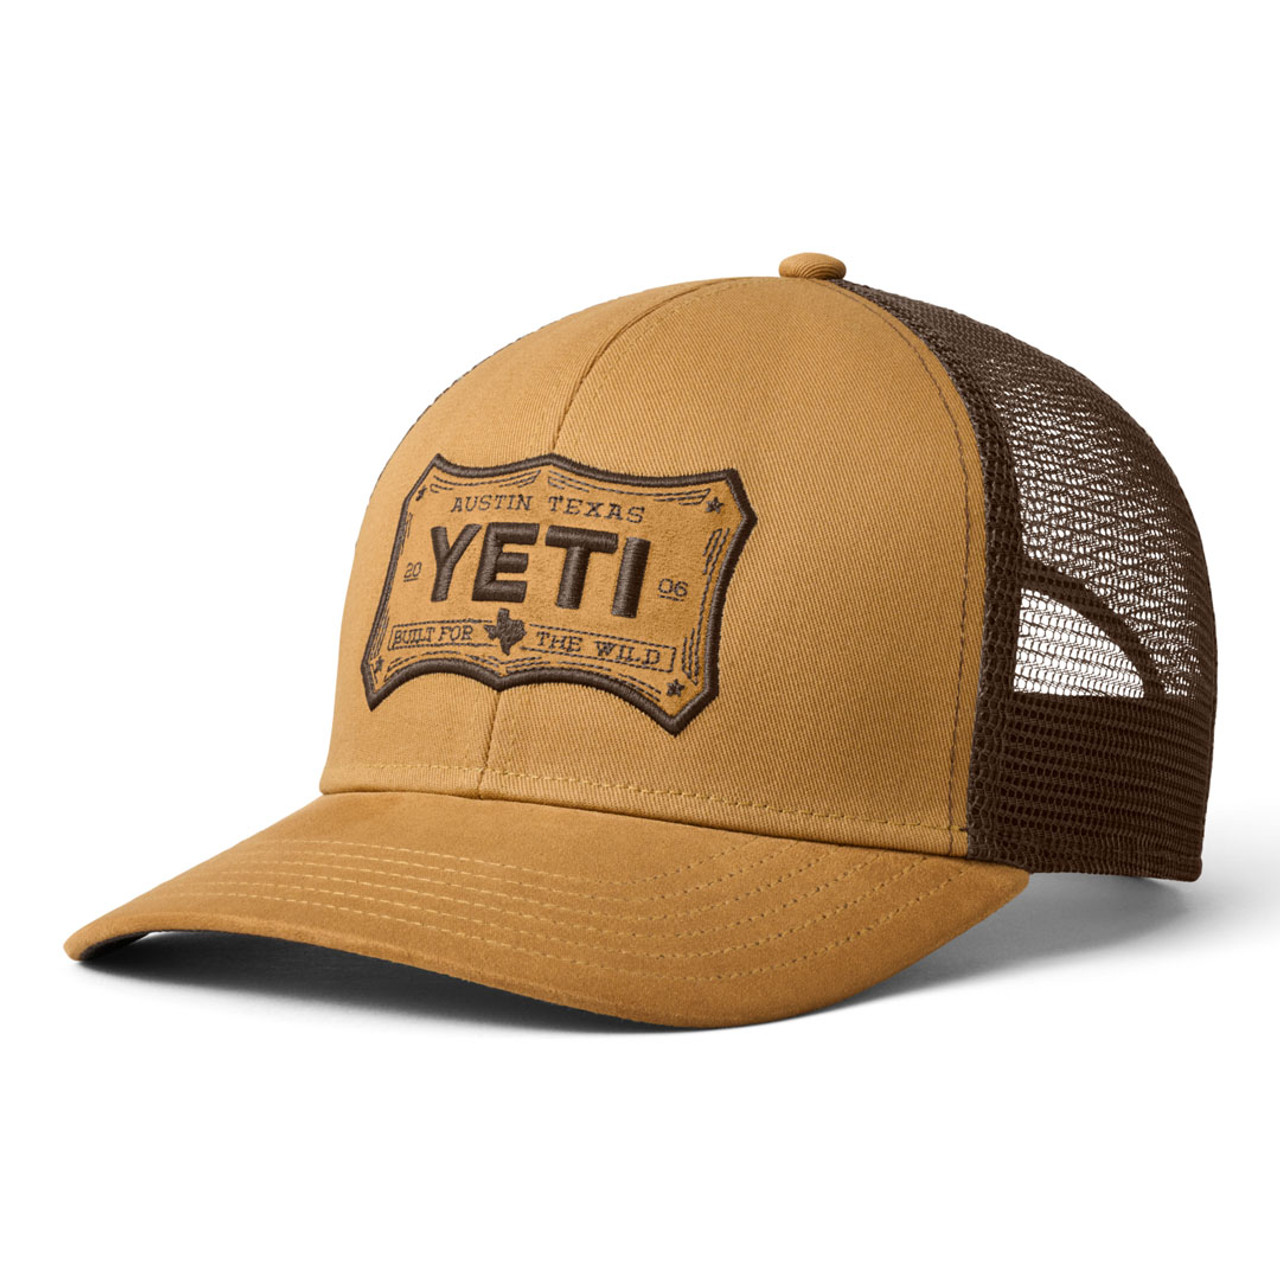 Built For The Wild Mid Pro Trucker Hat